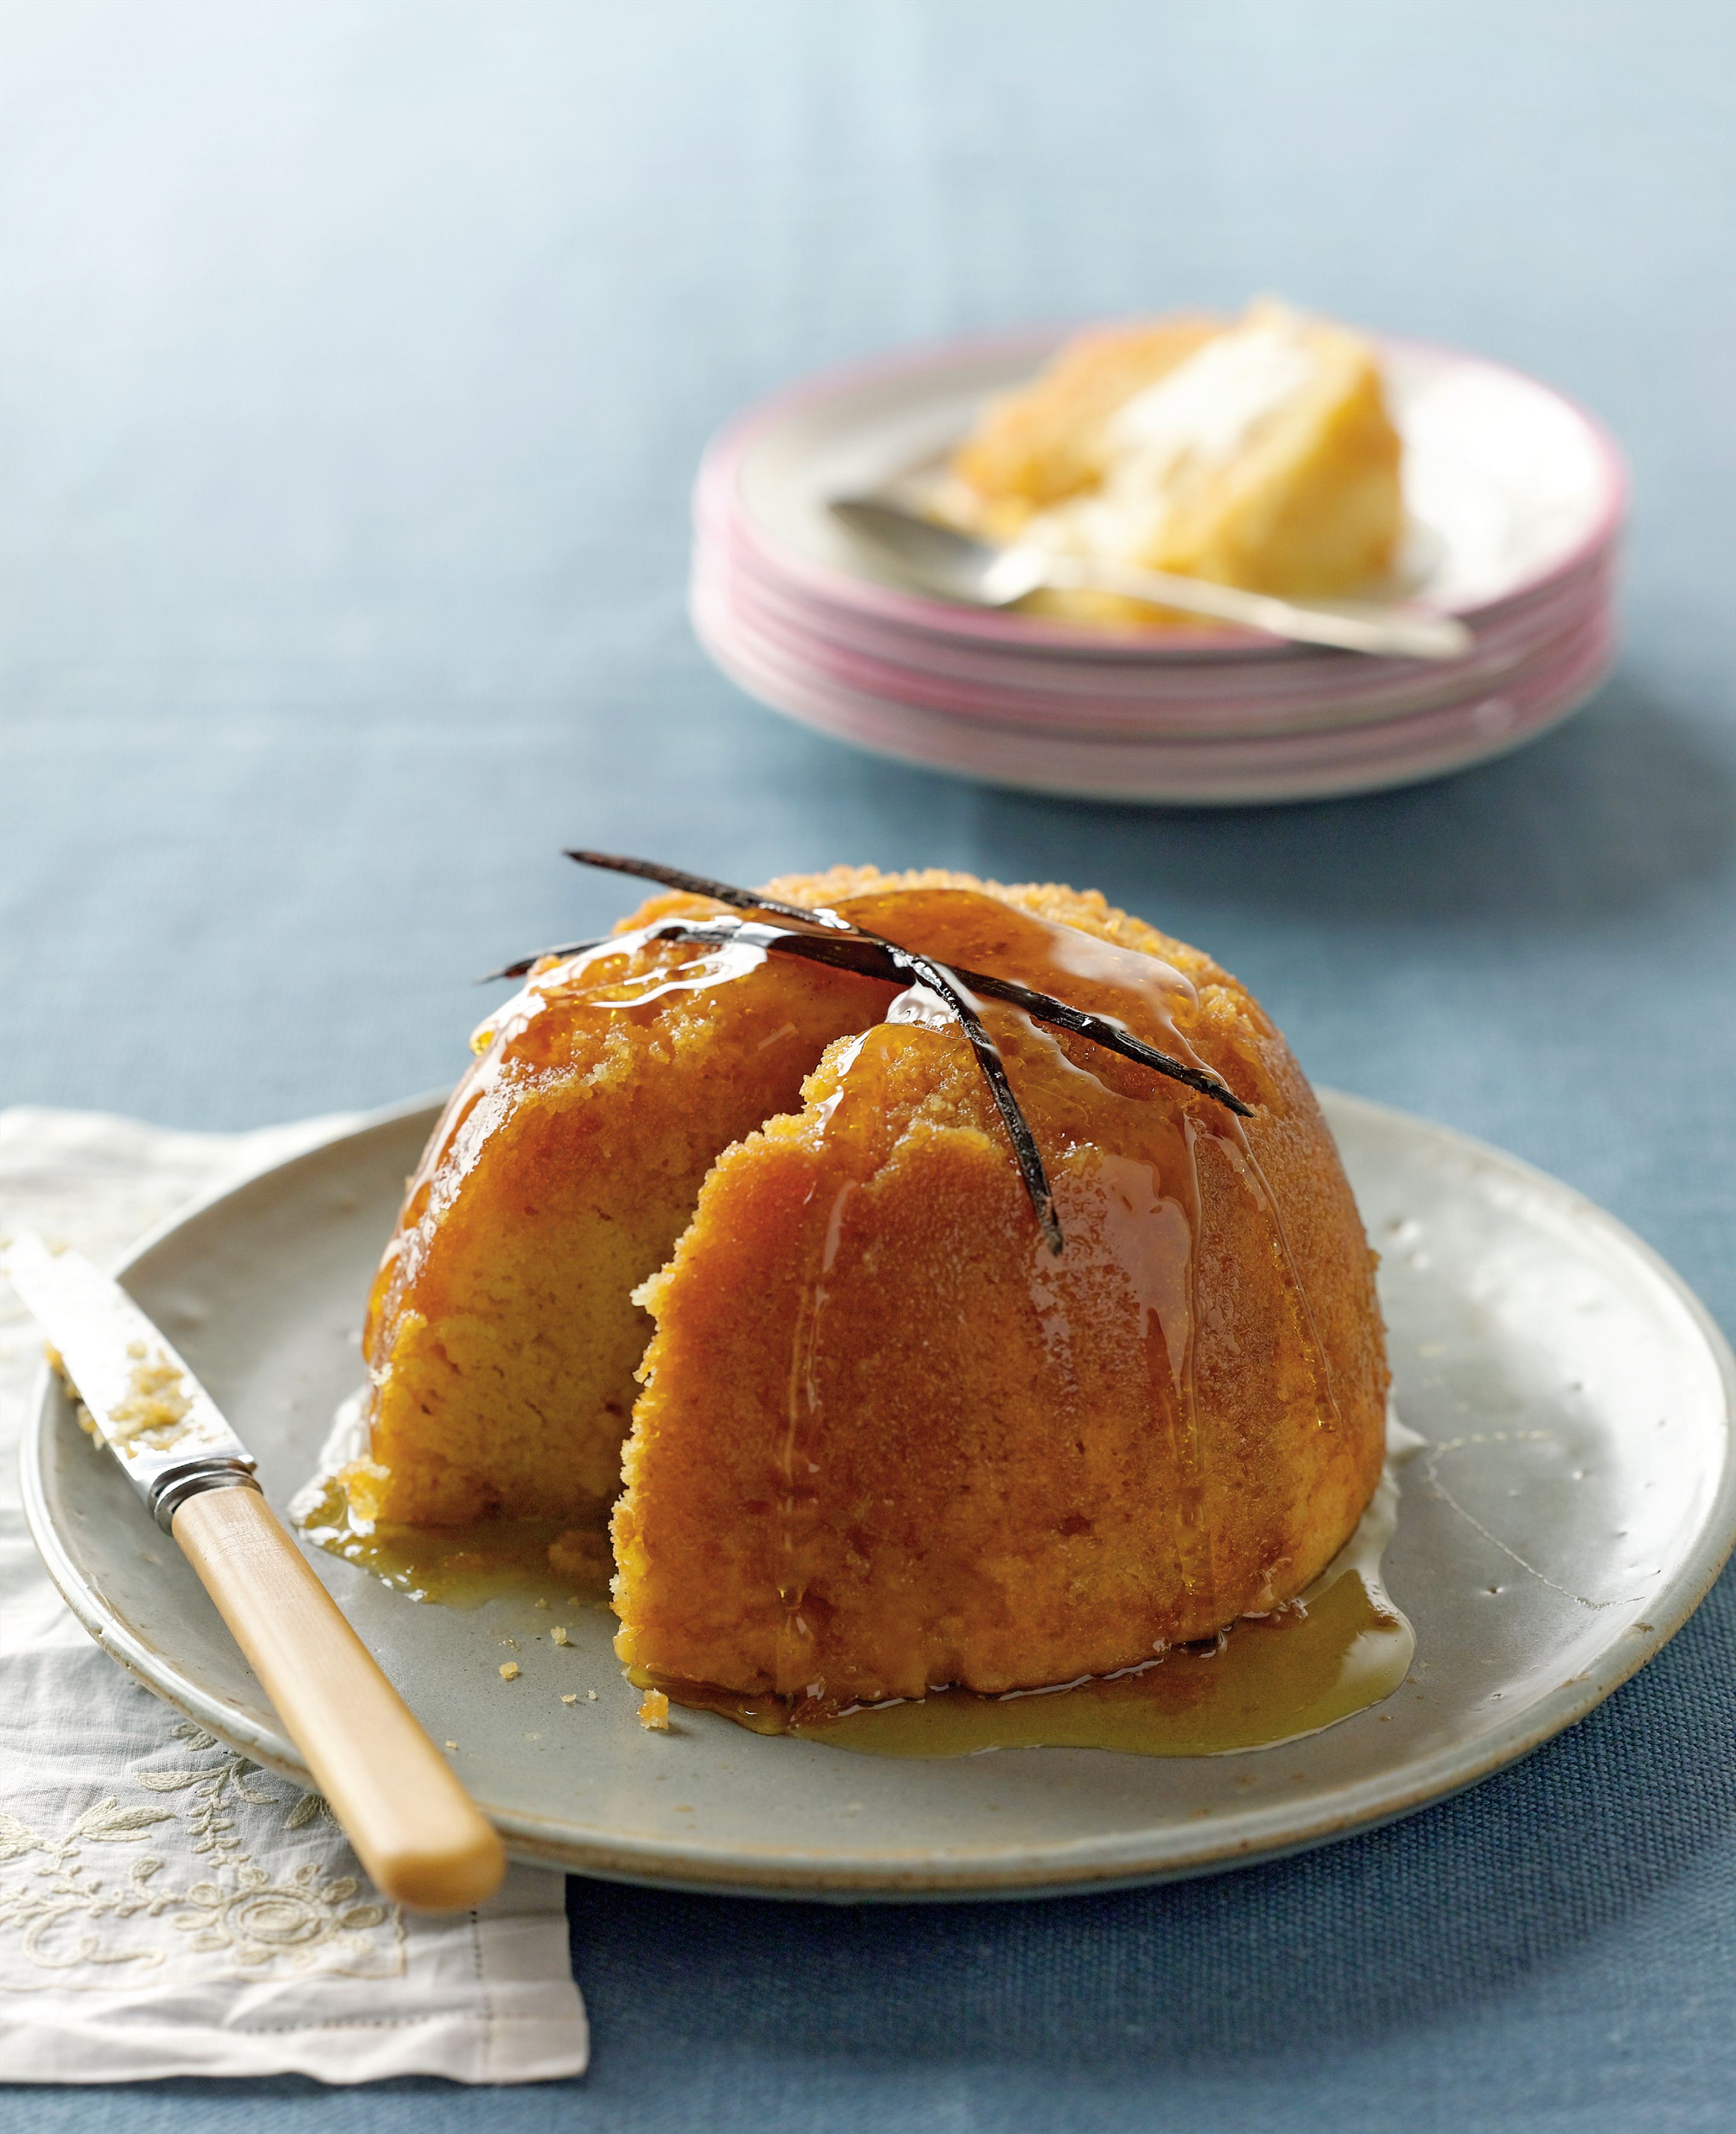 Golden syrup pudding